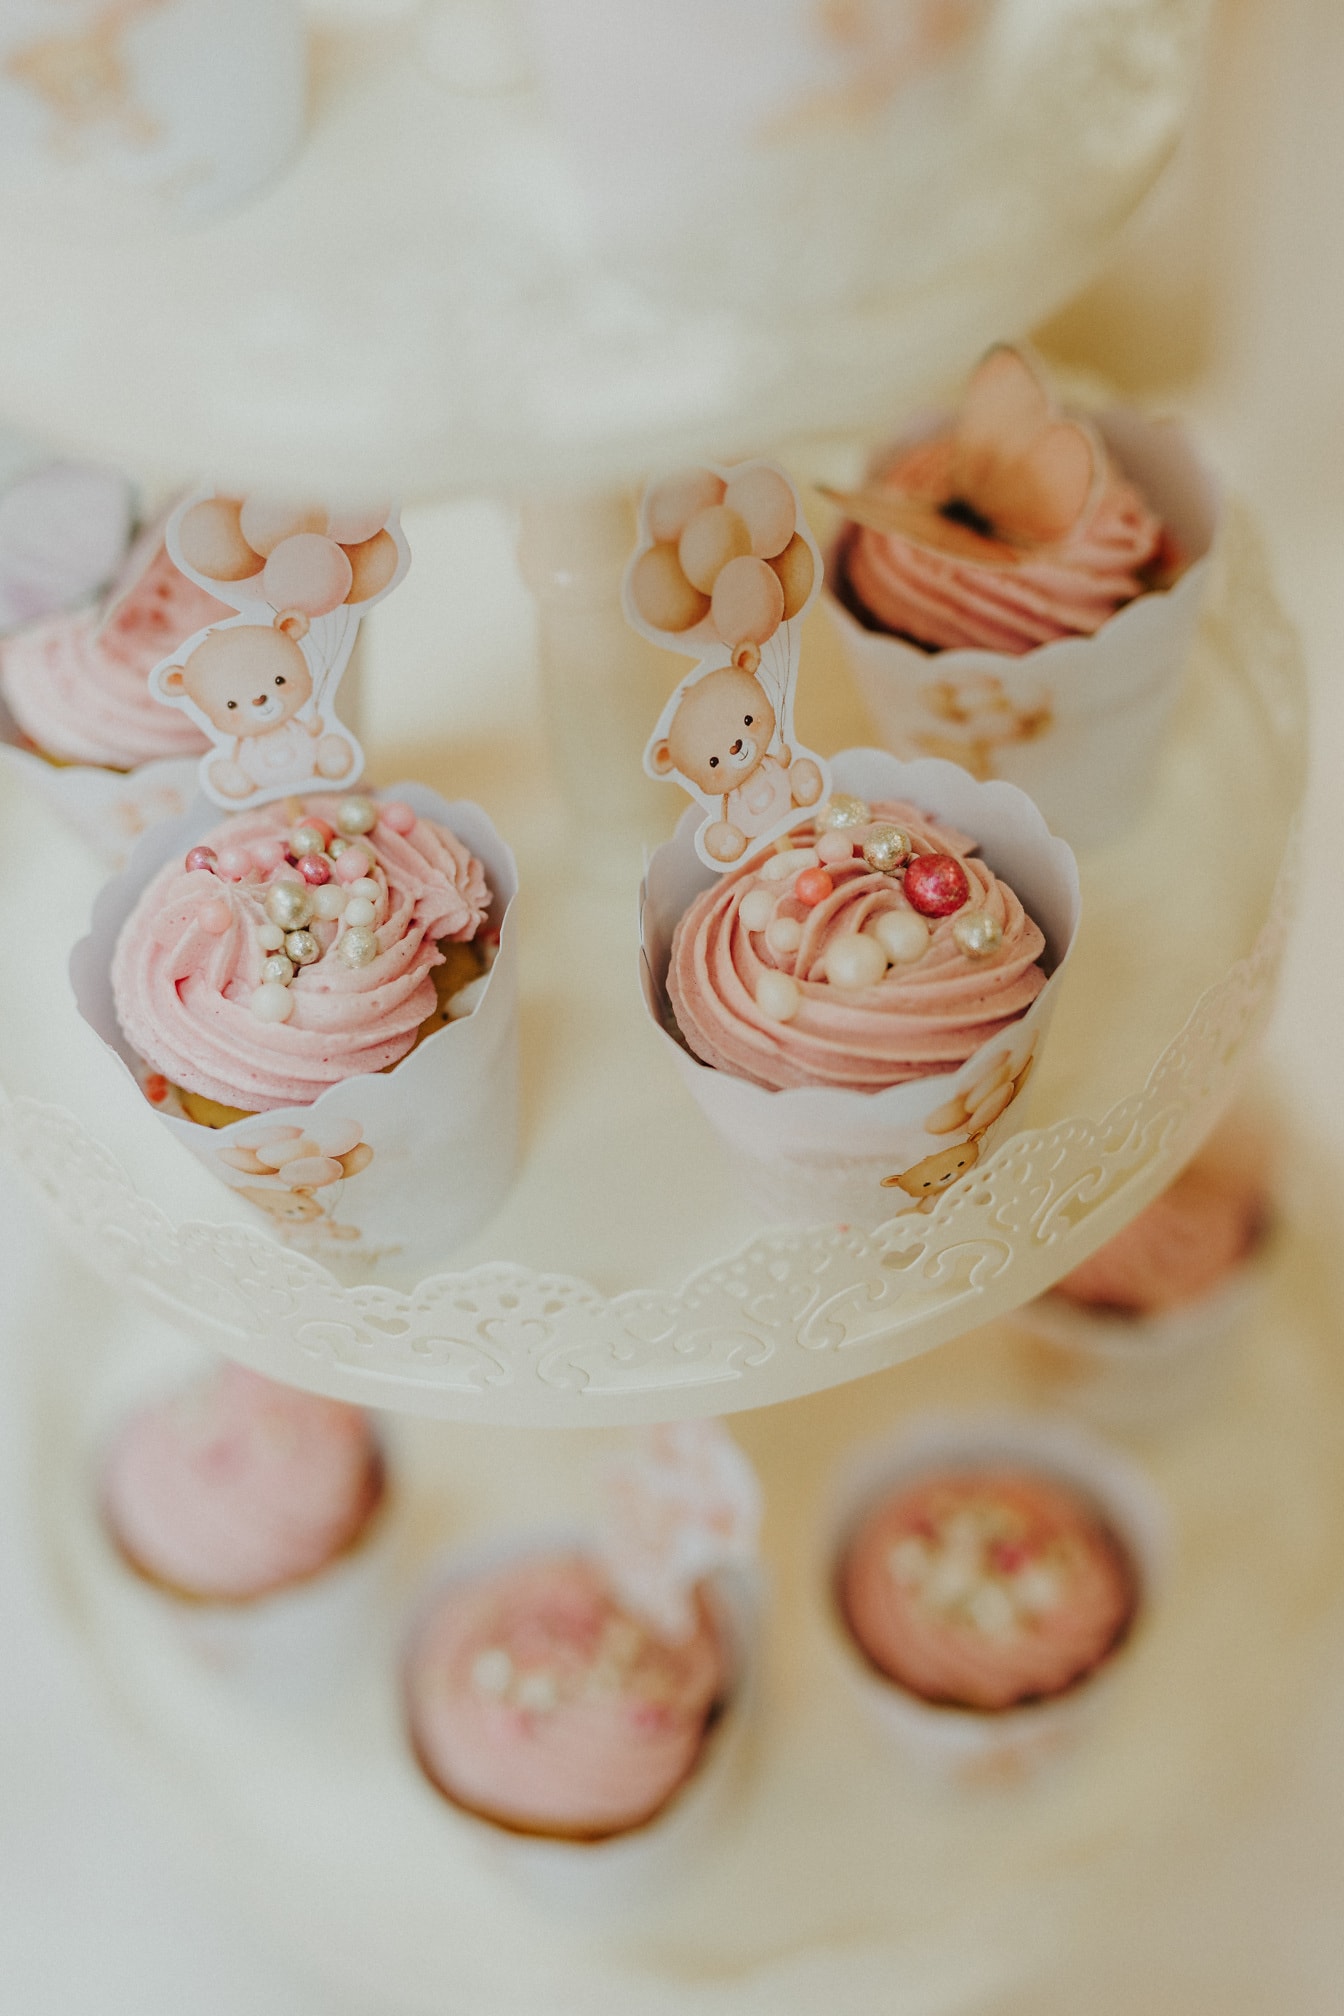 Creamy pinkish cupcakes with perl and teddy bear decoration